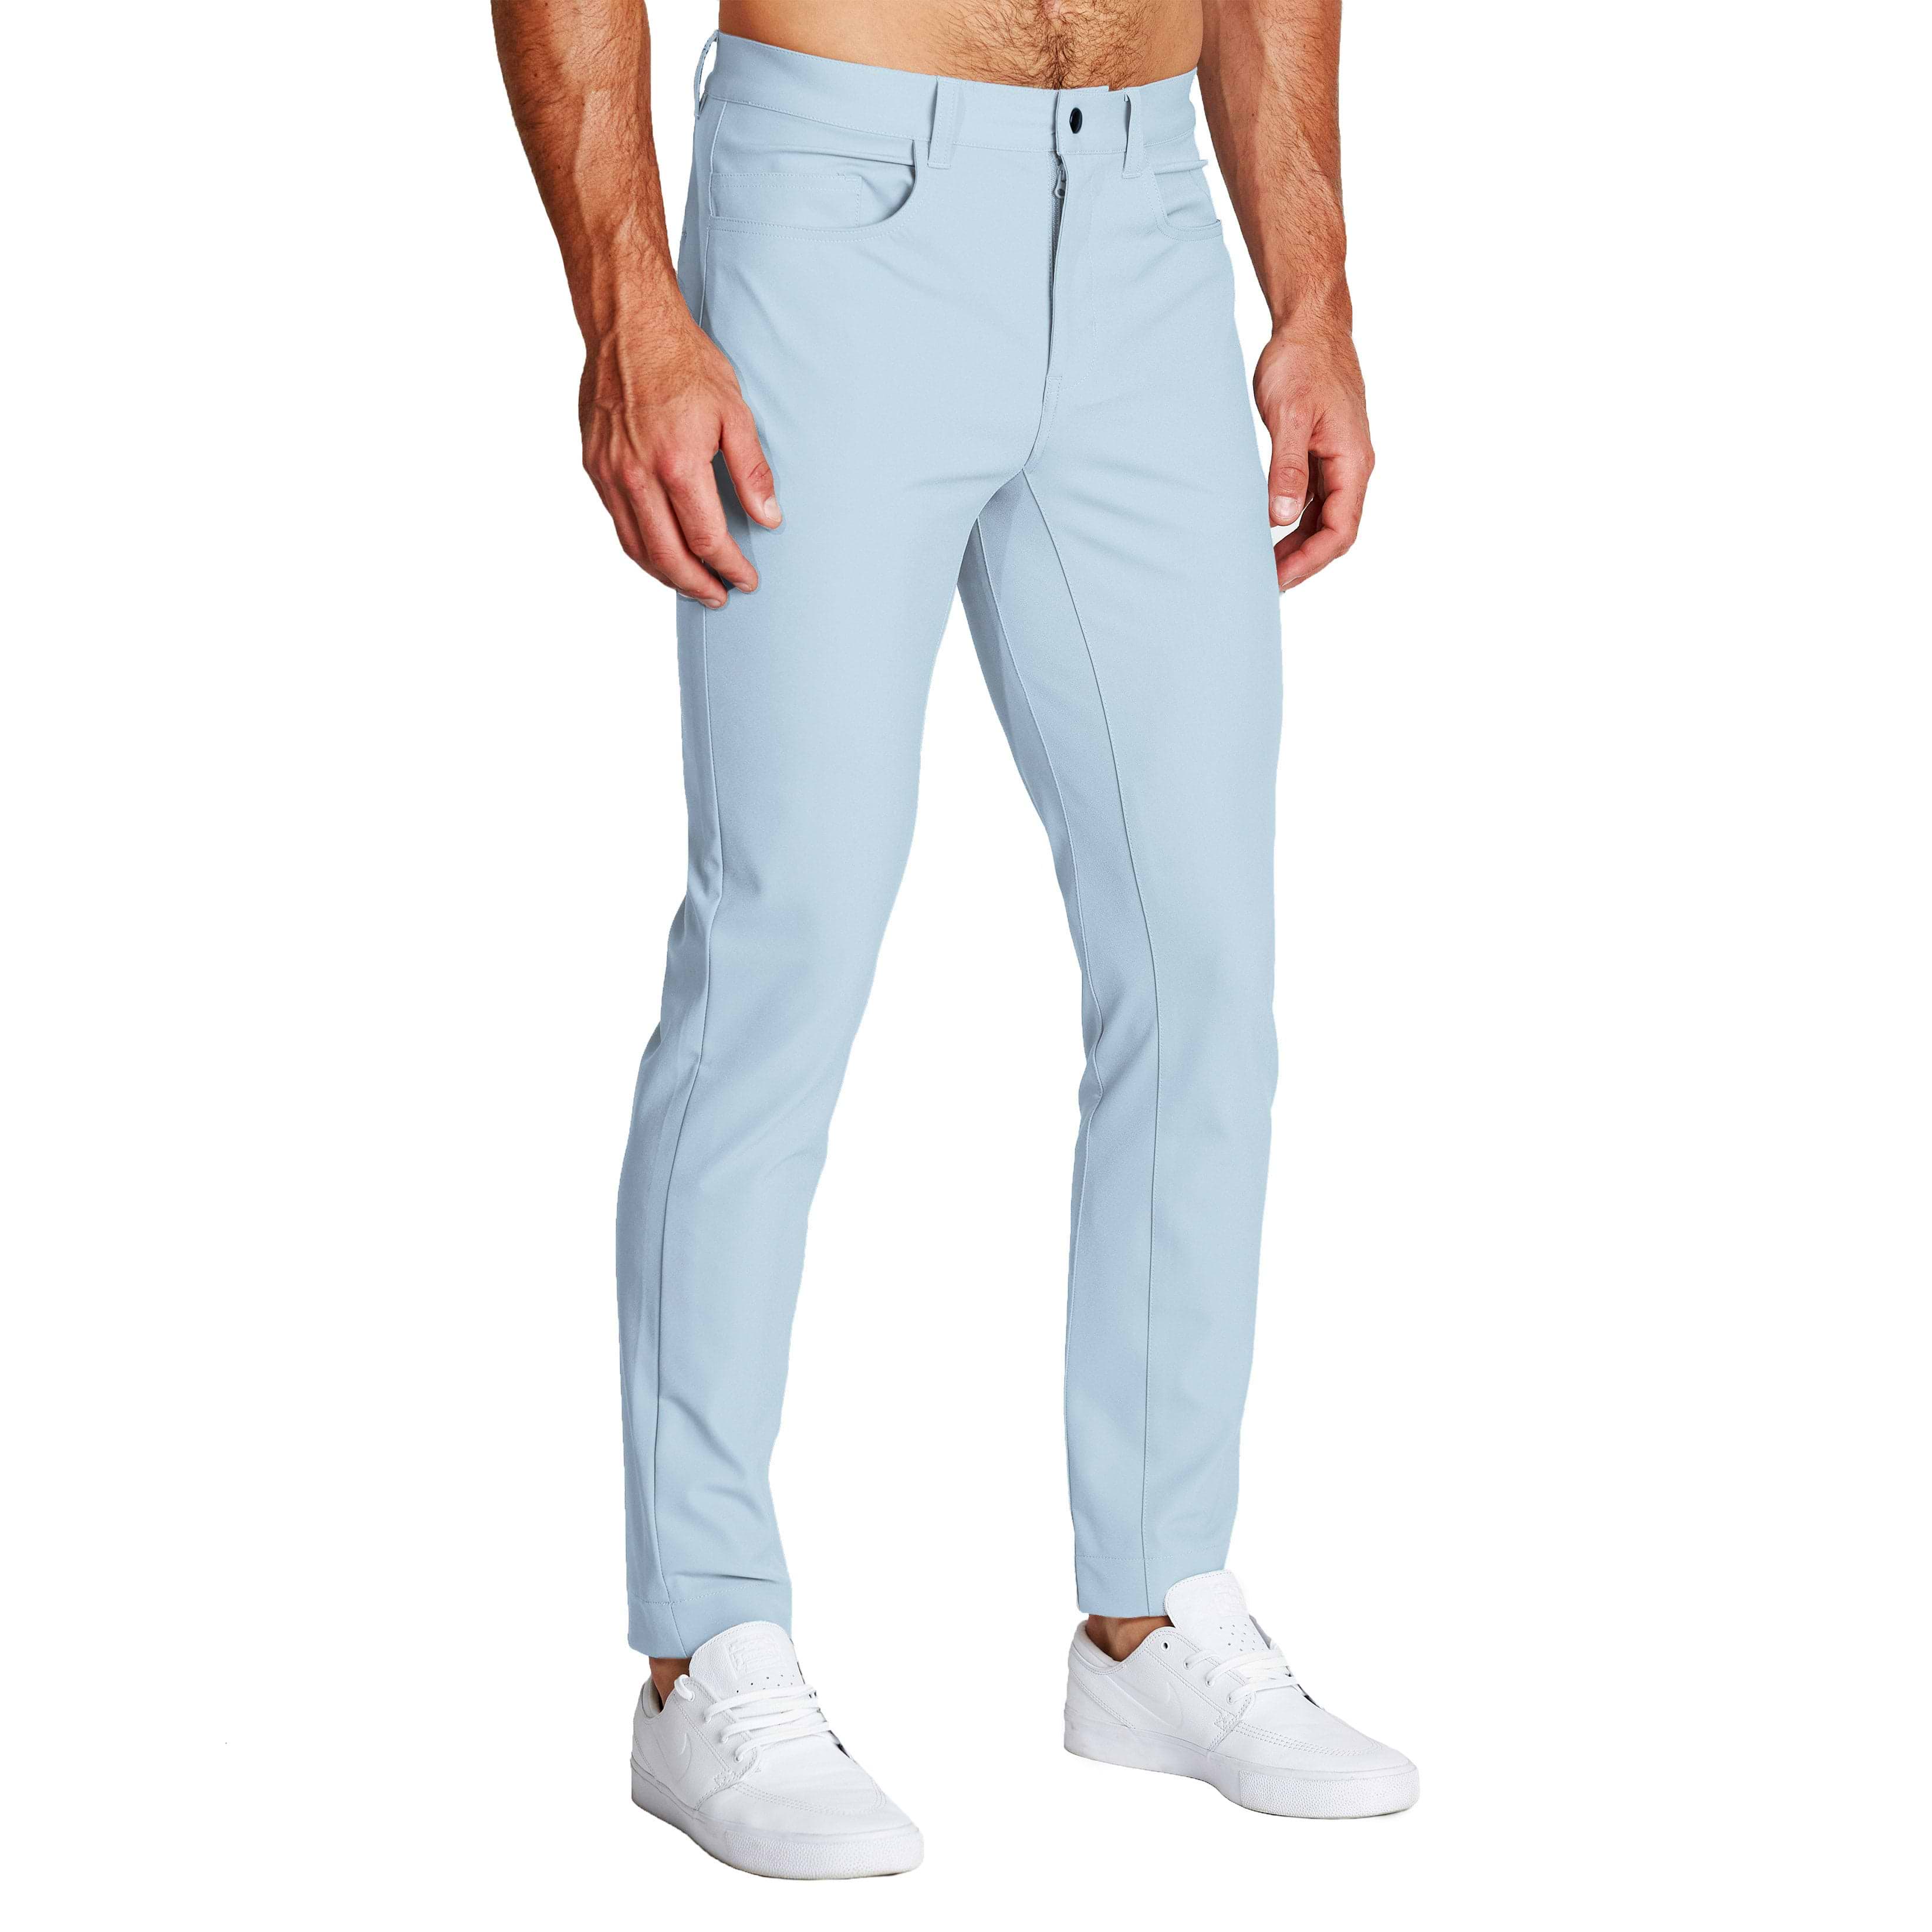 Athletic Fit, Stretch Tech Chinos